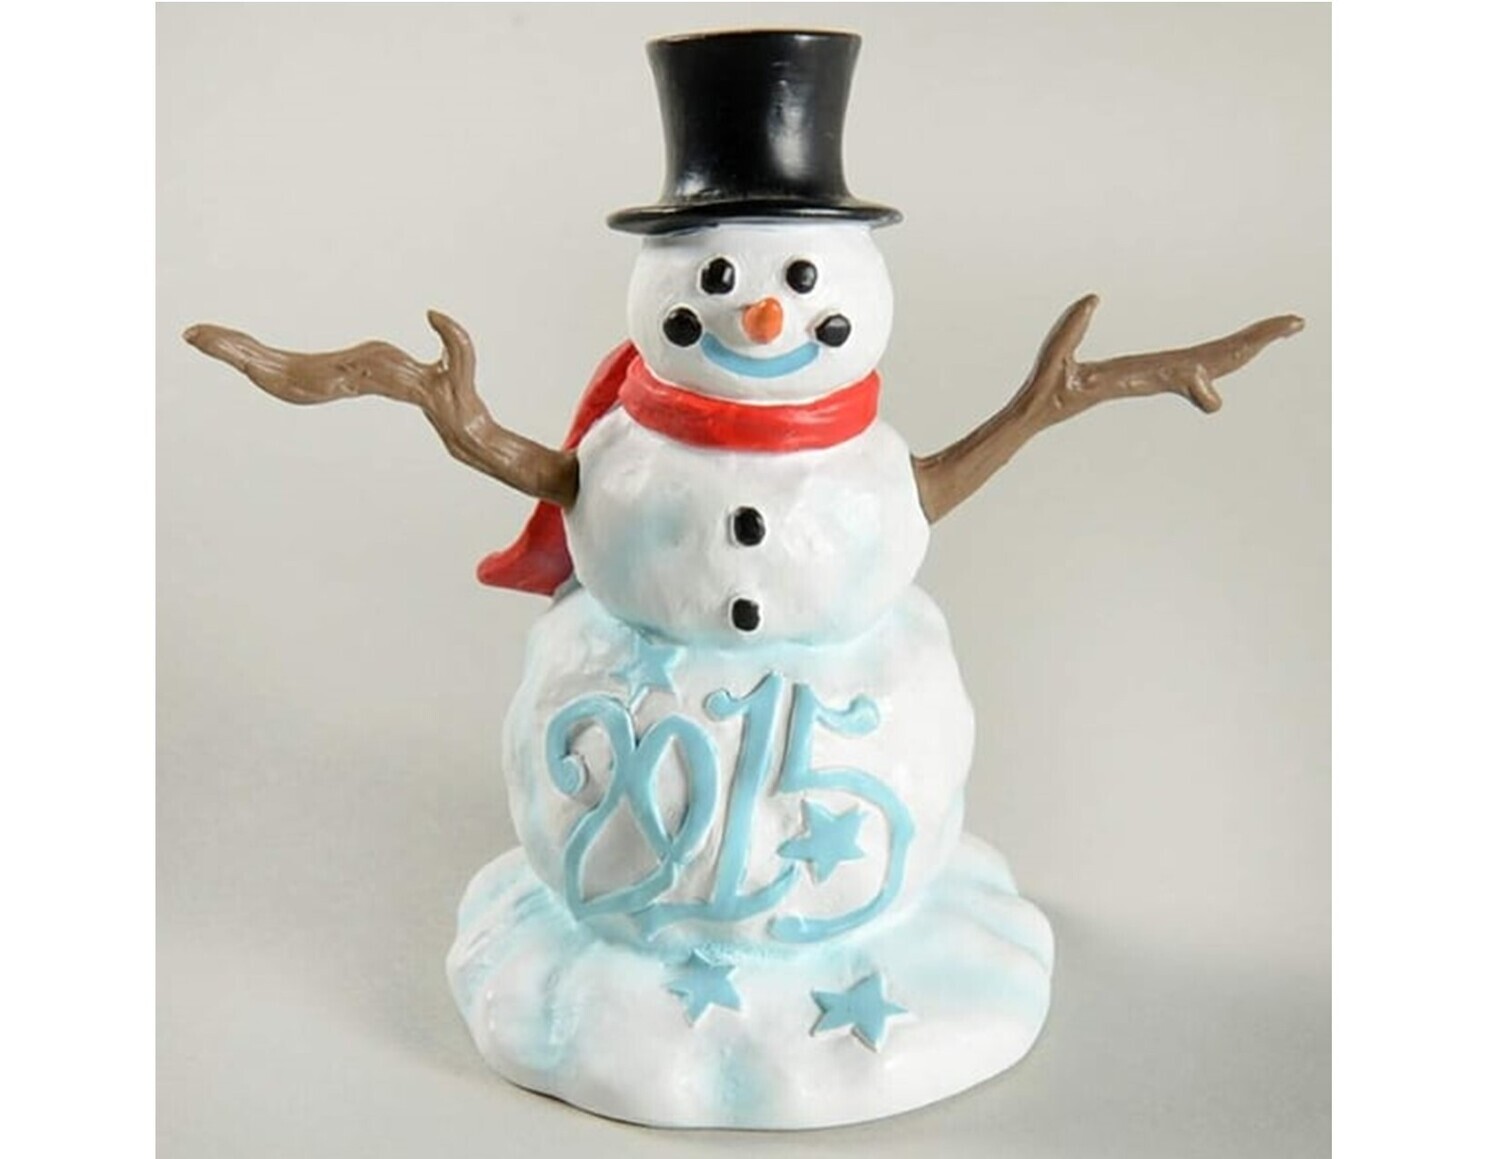 Department 56 Annual Village Accessory "Lucky the Snowman - 2015" (4047548)